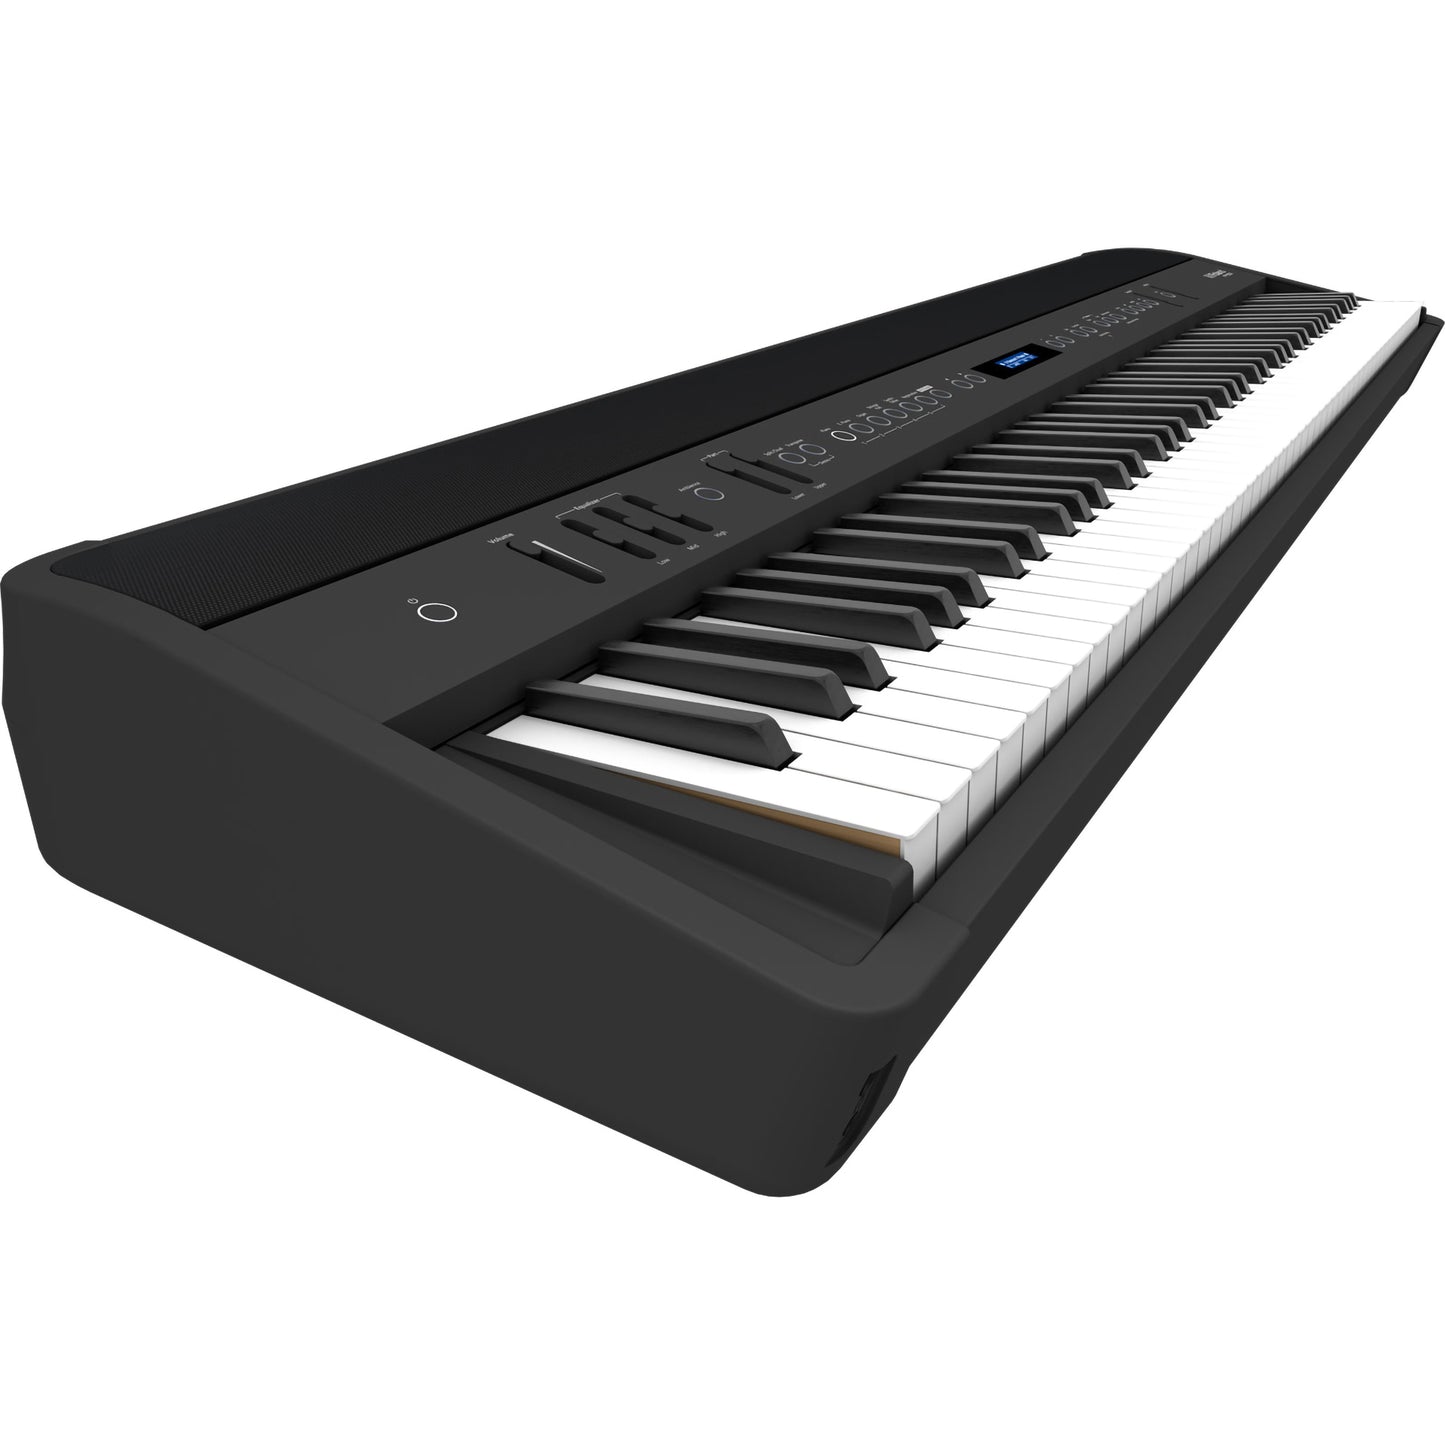 Roland FP-90X-BK Flagship Portable Piano w/ Built in Speakers, Bluetooth - Black